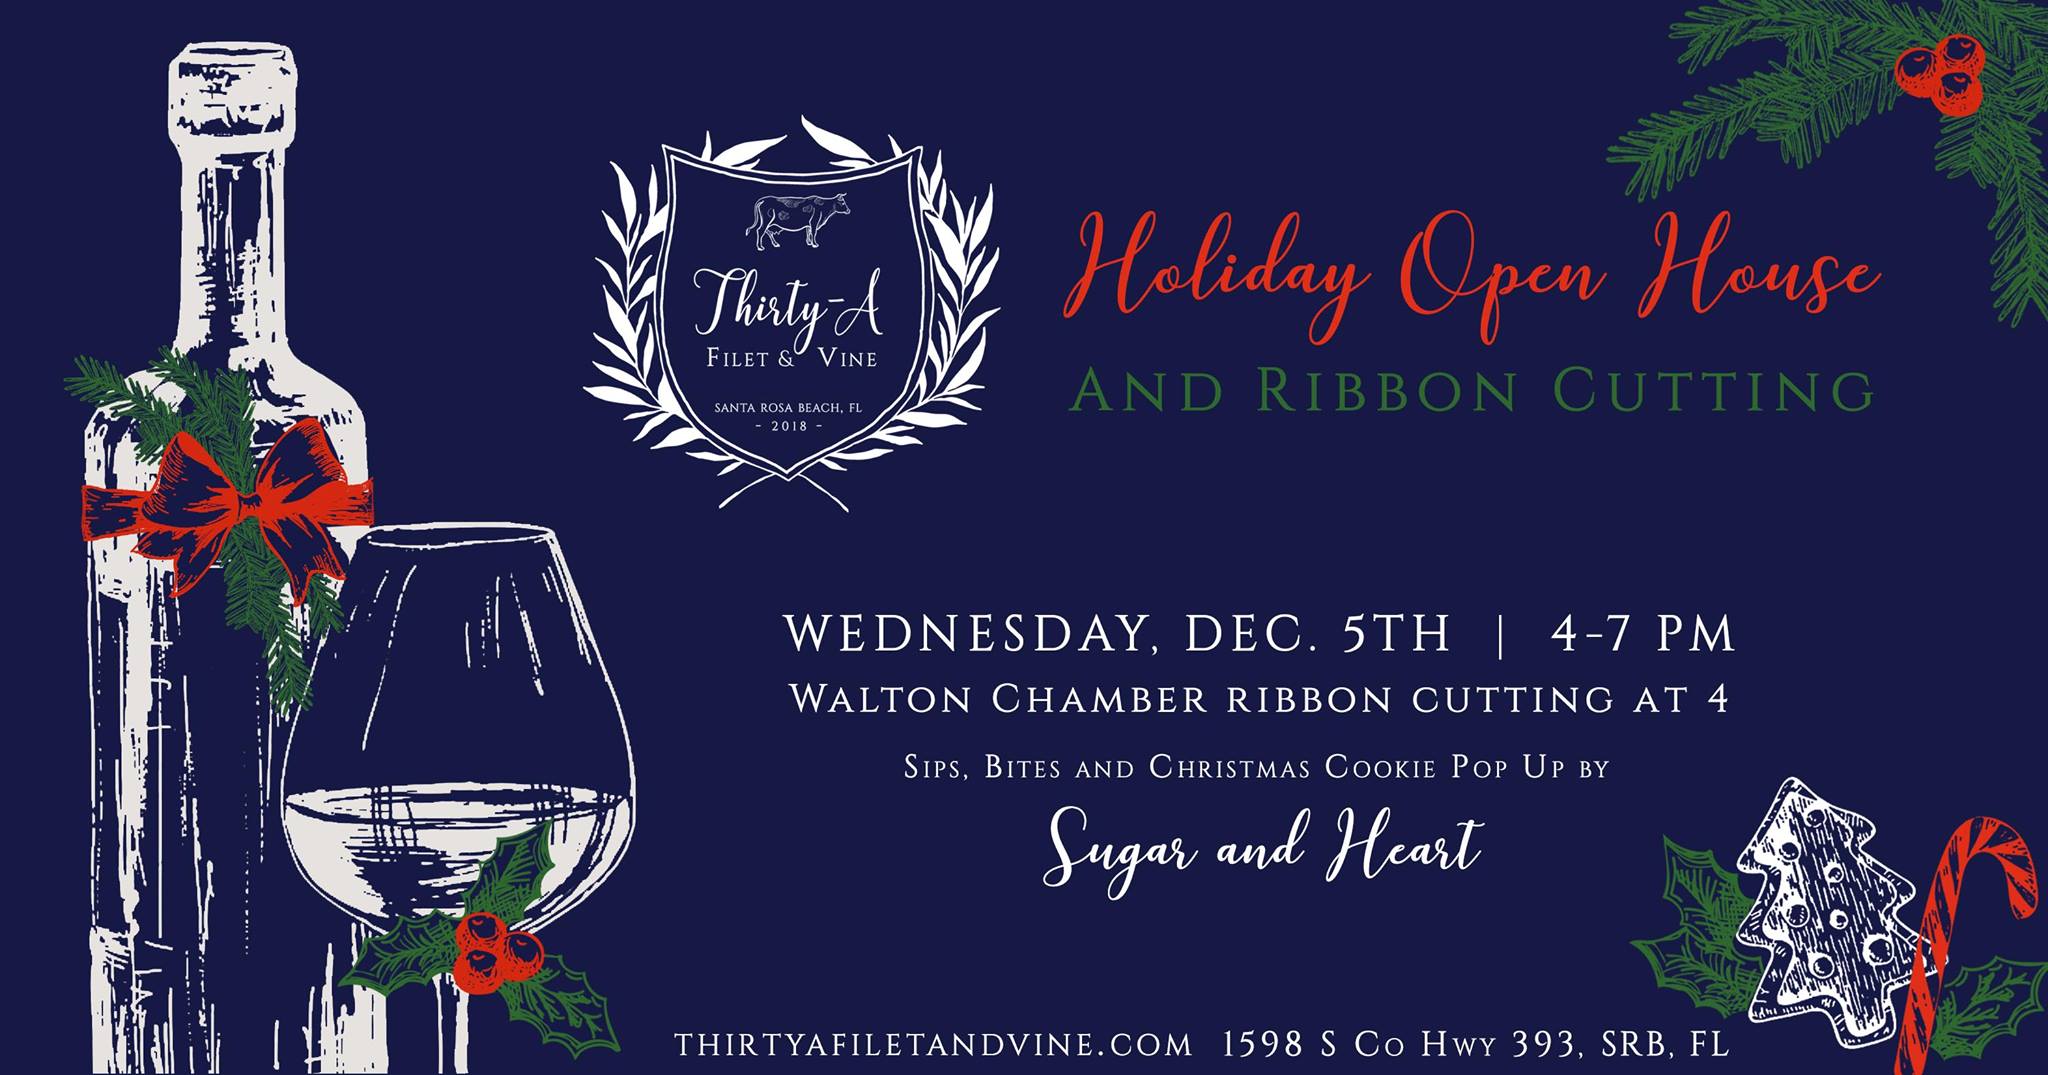 Thirty A Filet & Vine to host holiday open house, ribbon cutting